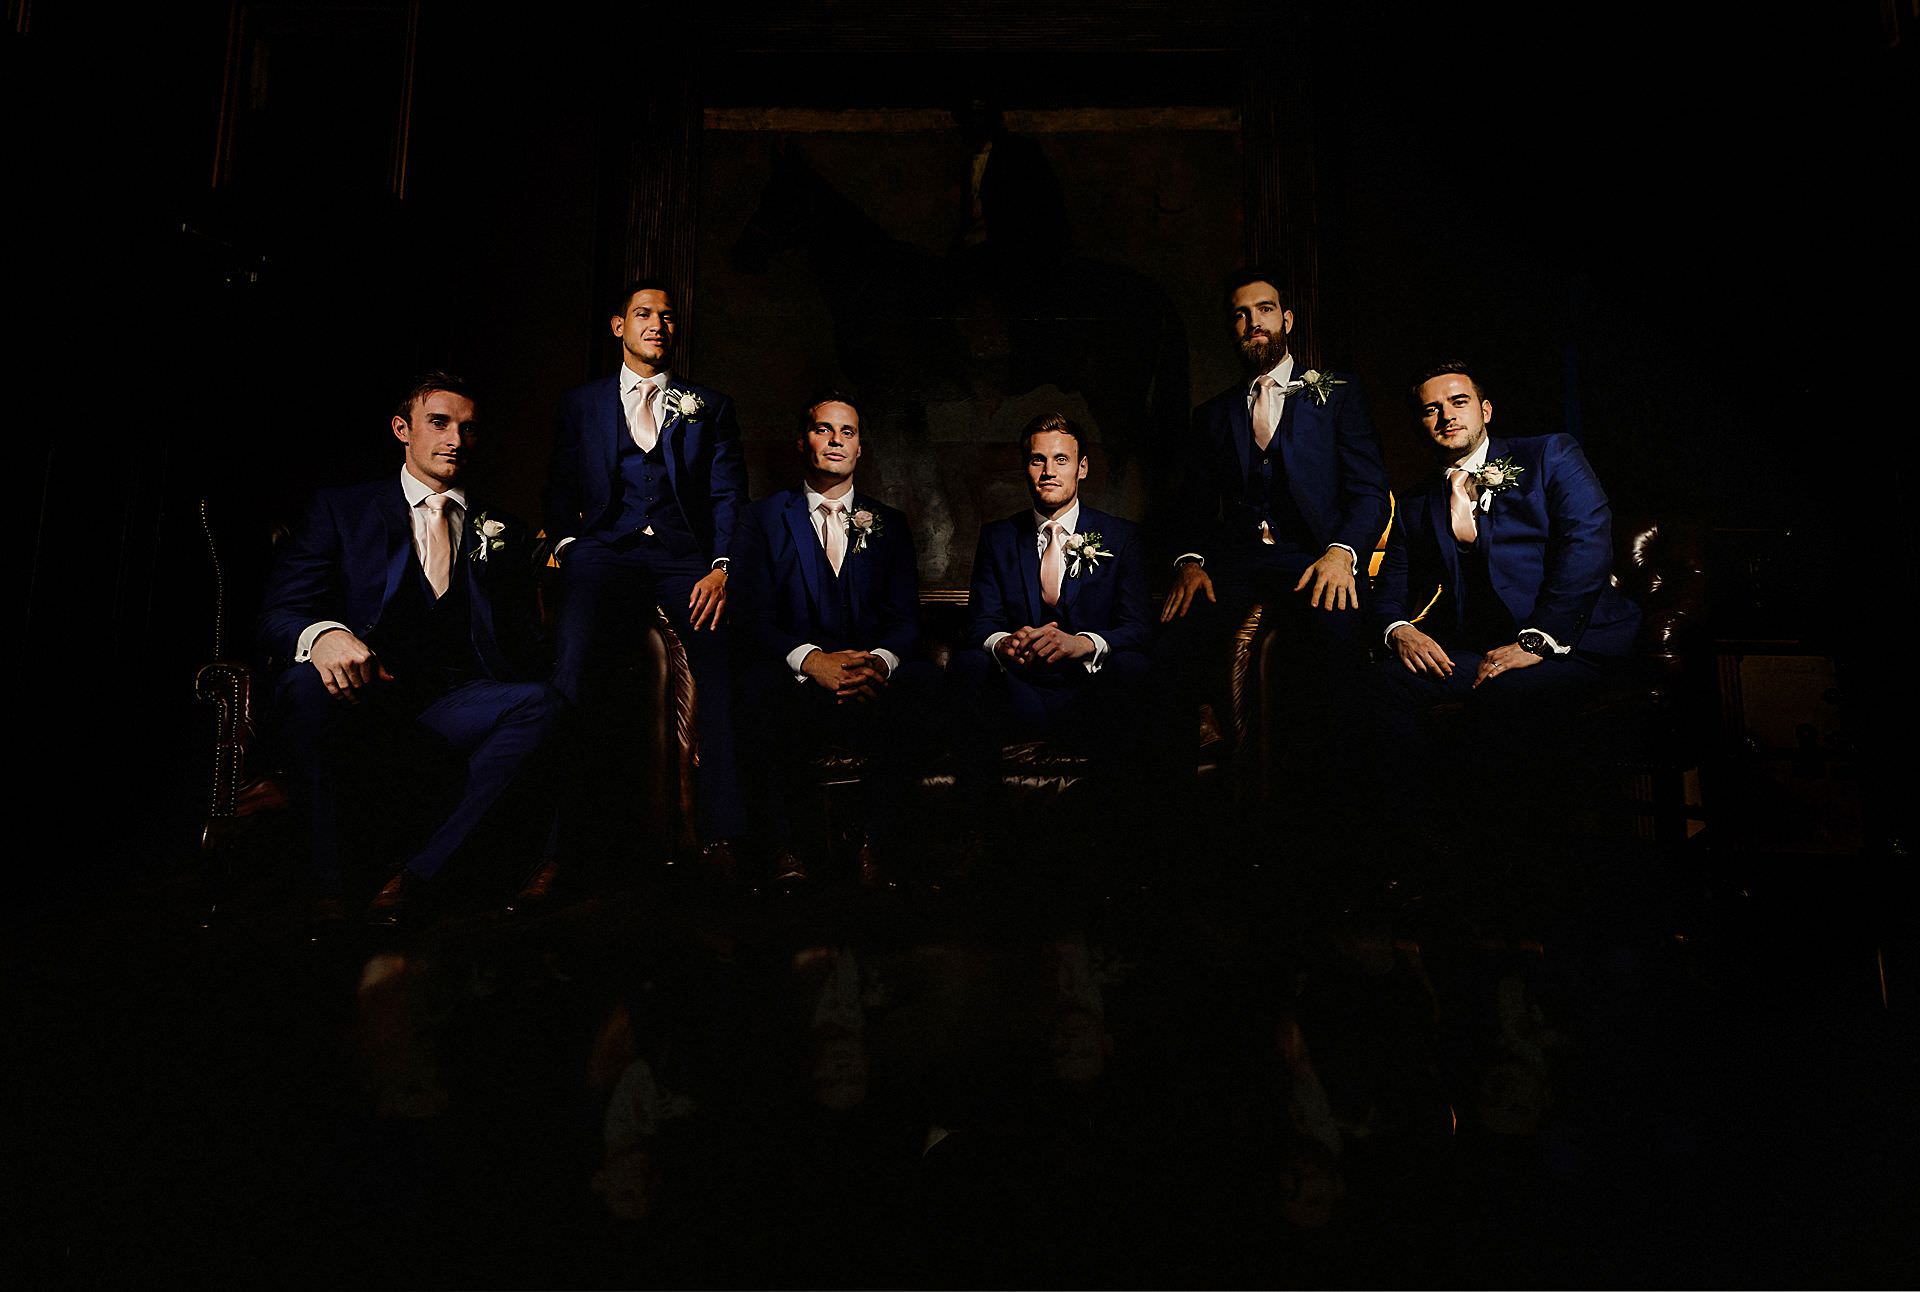 all of the groomsmen on the chairs at stubton hall, newark, lincolnshire